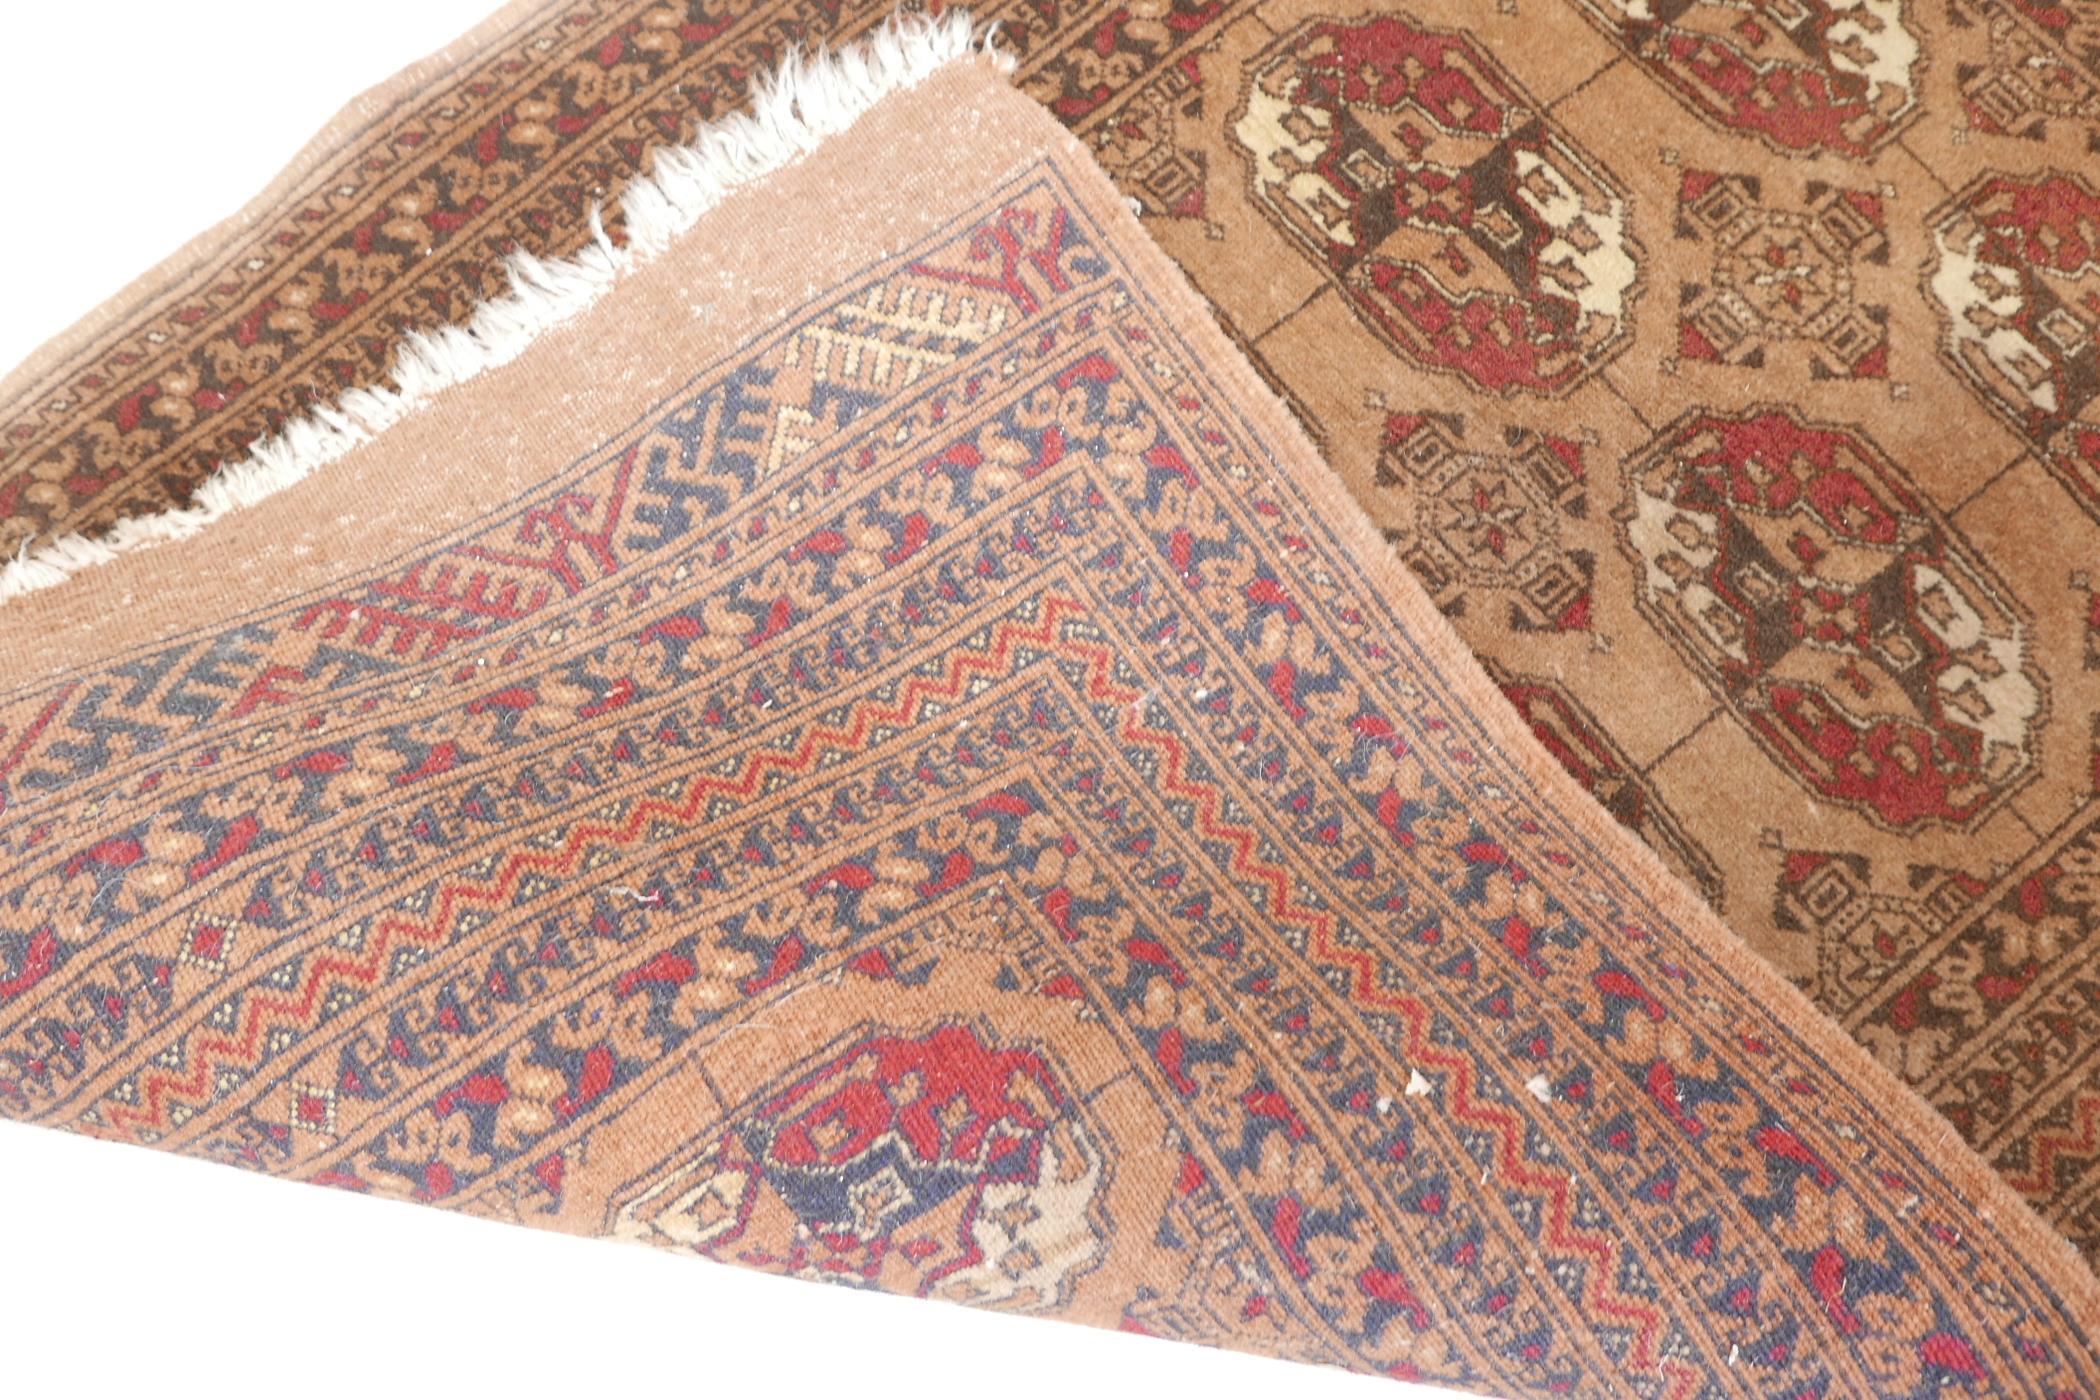 A brown ground Bokhara rug, 33½" x 53" - Image 4 of 4